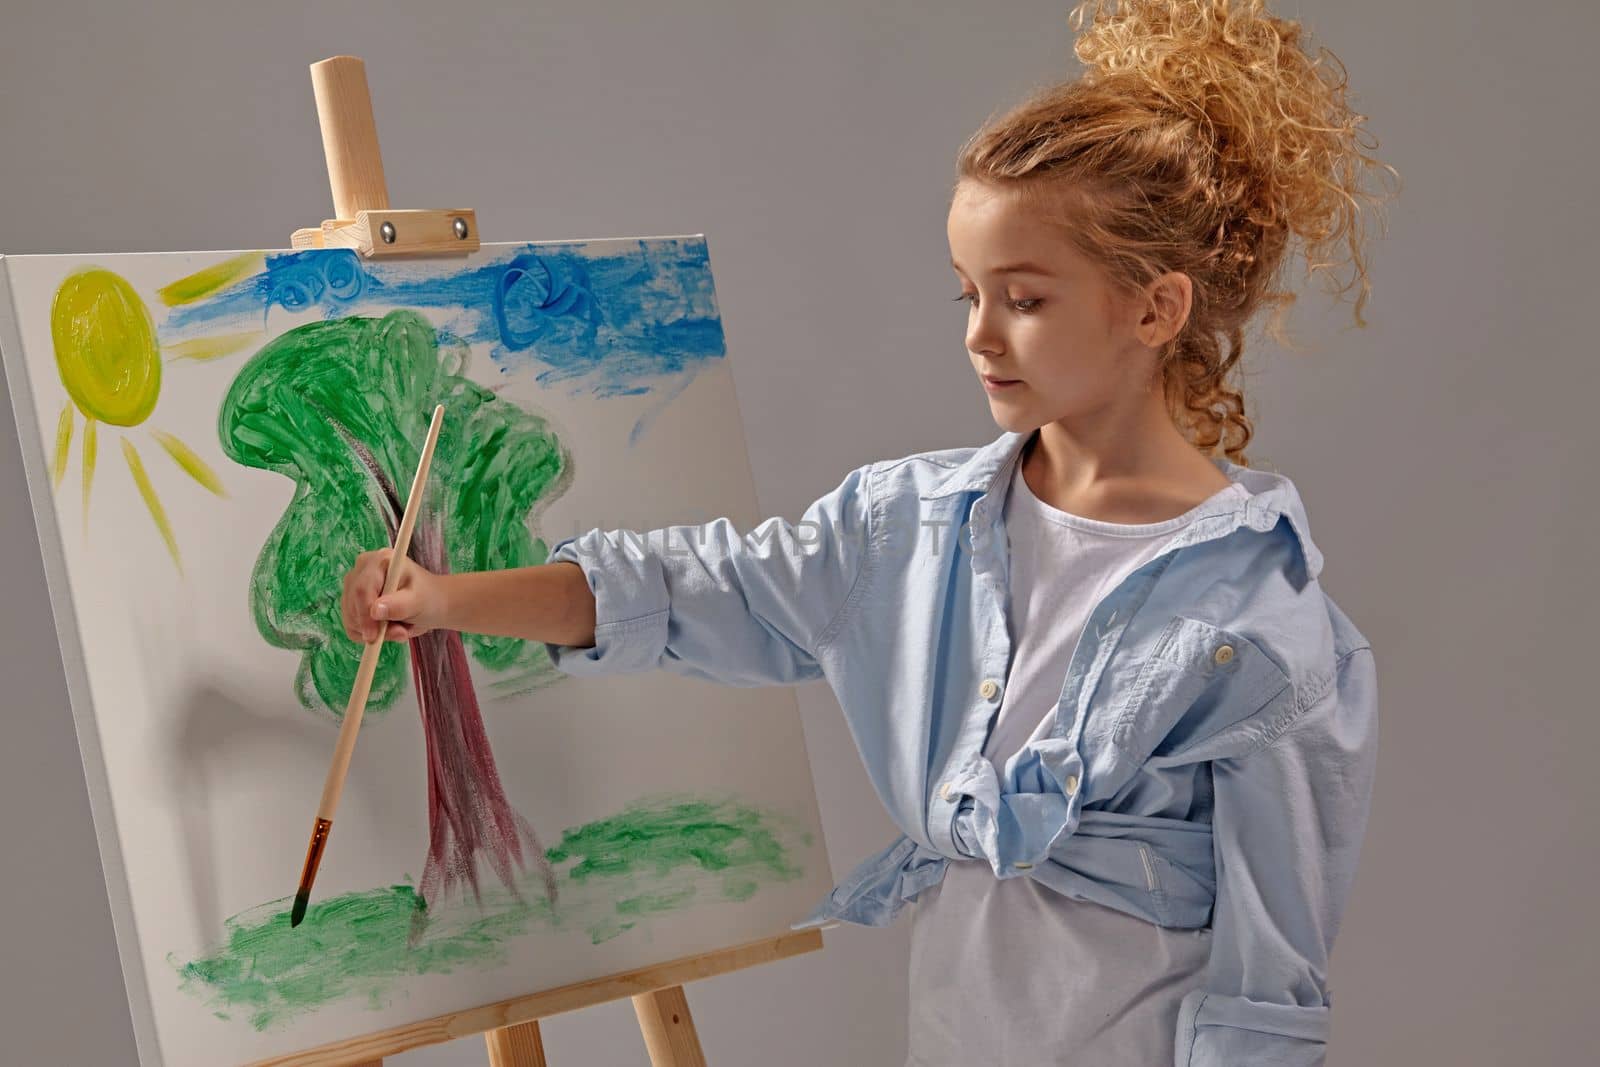 Pretty school girl whith a curly blond hair, wearing in a blue shirt and white t-shirt is painting with a watercolor brush on an easel, standing on a gray background.